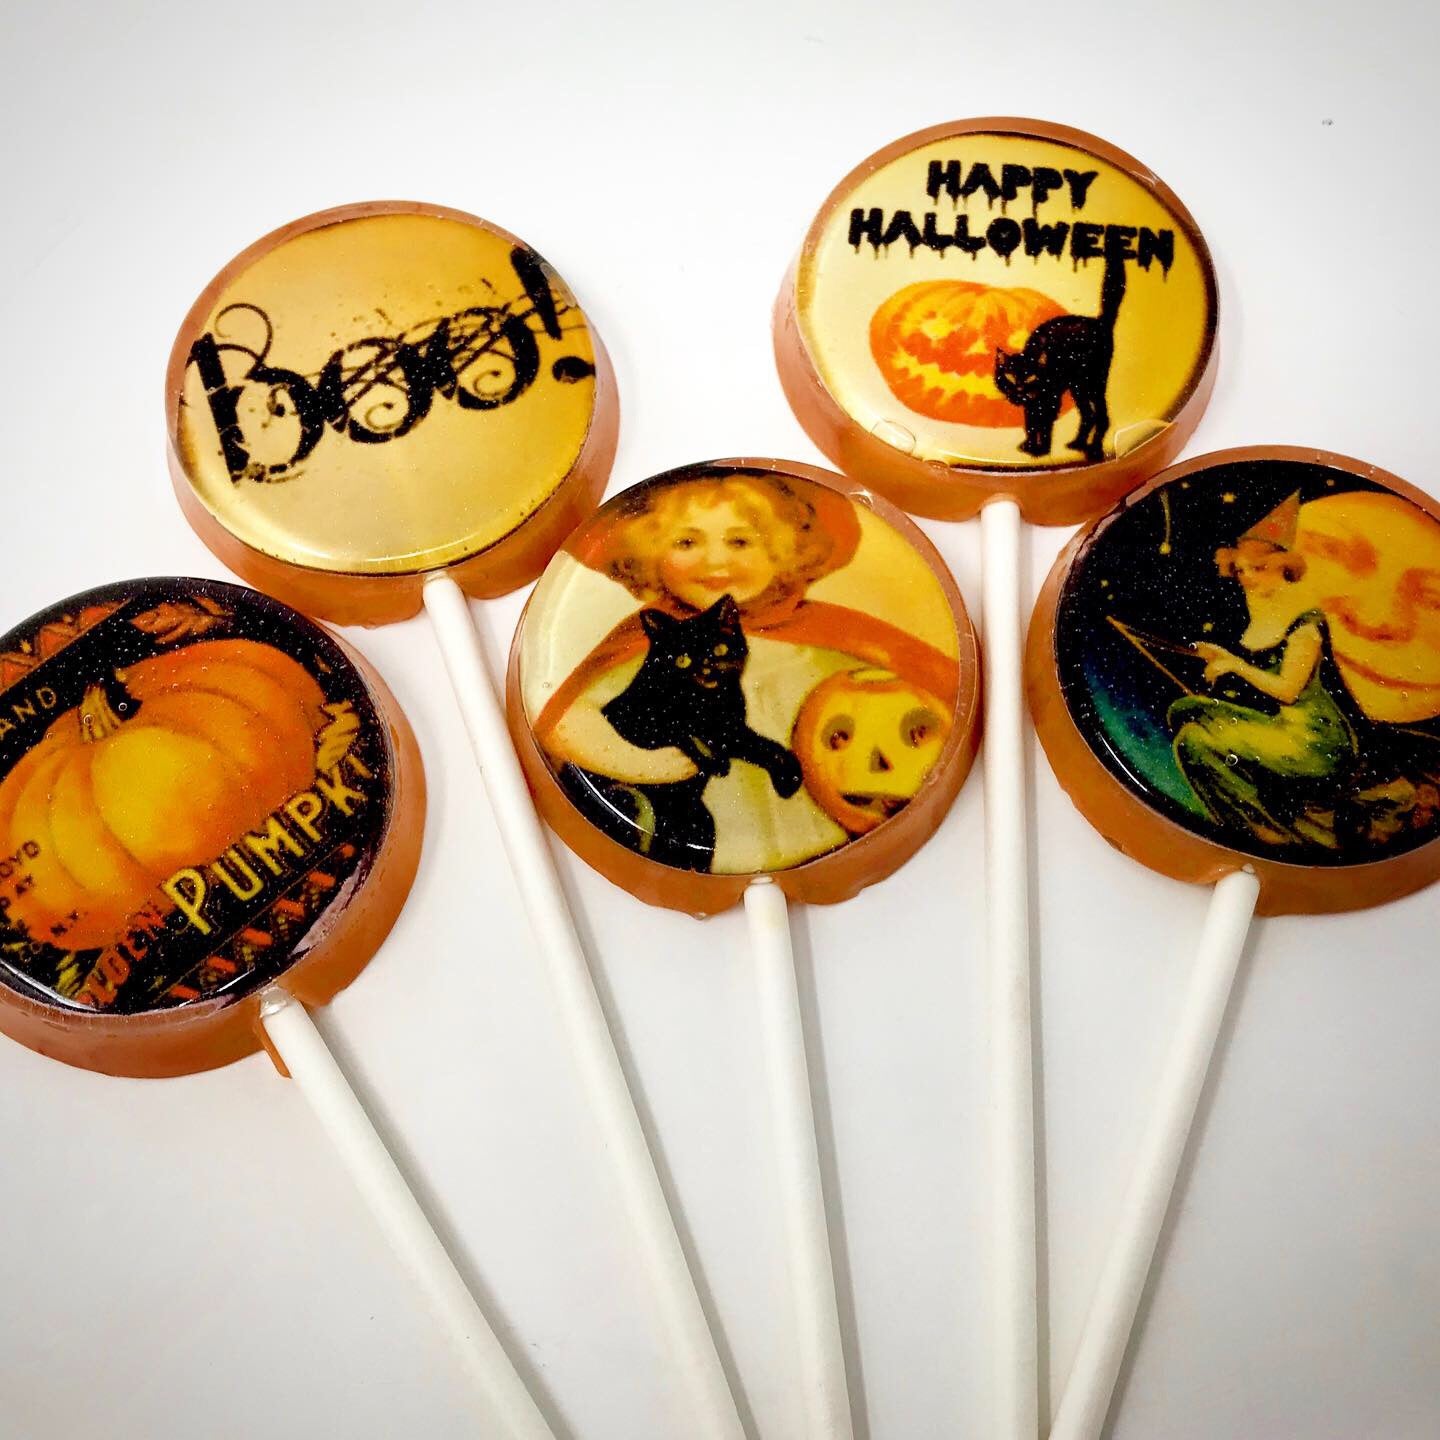 Classic Halloween Lollipop 5-piece set by I Want Candy!